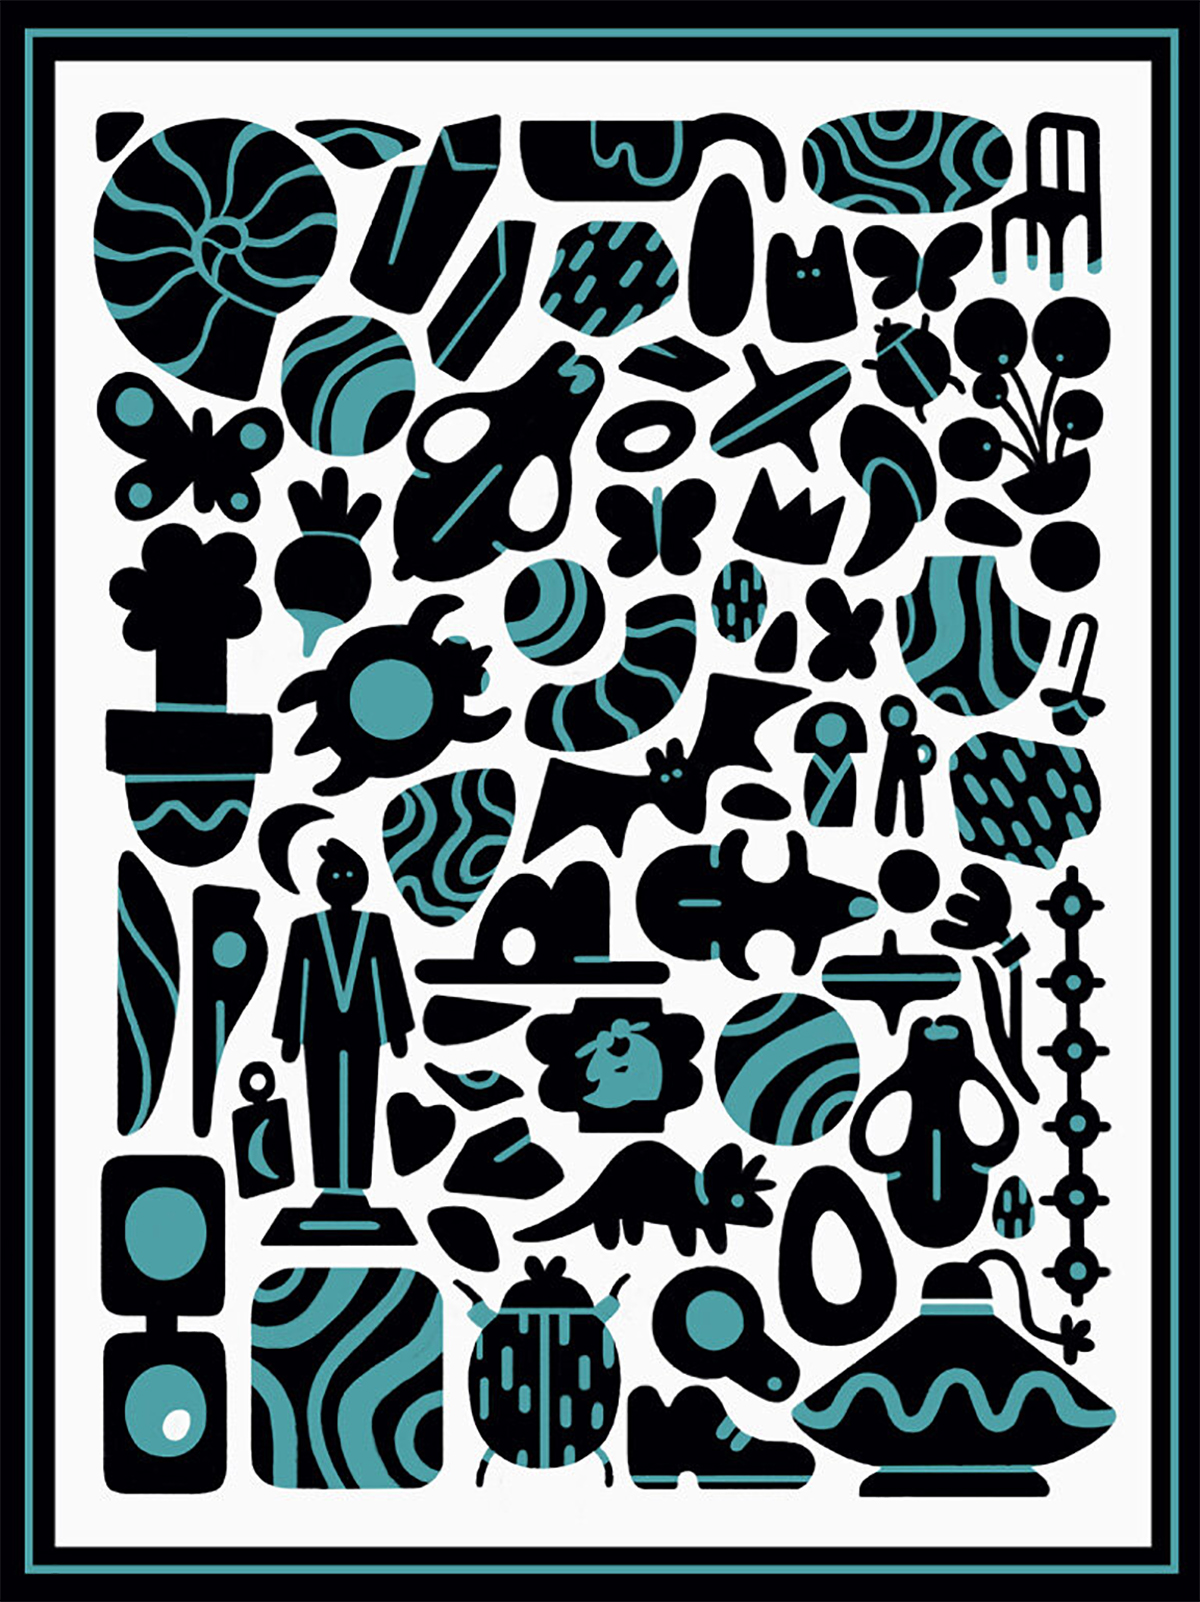 Pattern design of archaeological icons and bugs and other artifacts arranged tightly, black and blue on white background with thick black border